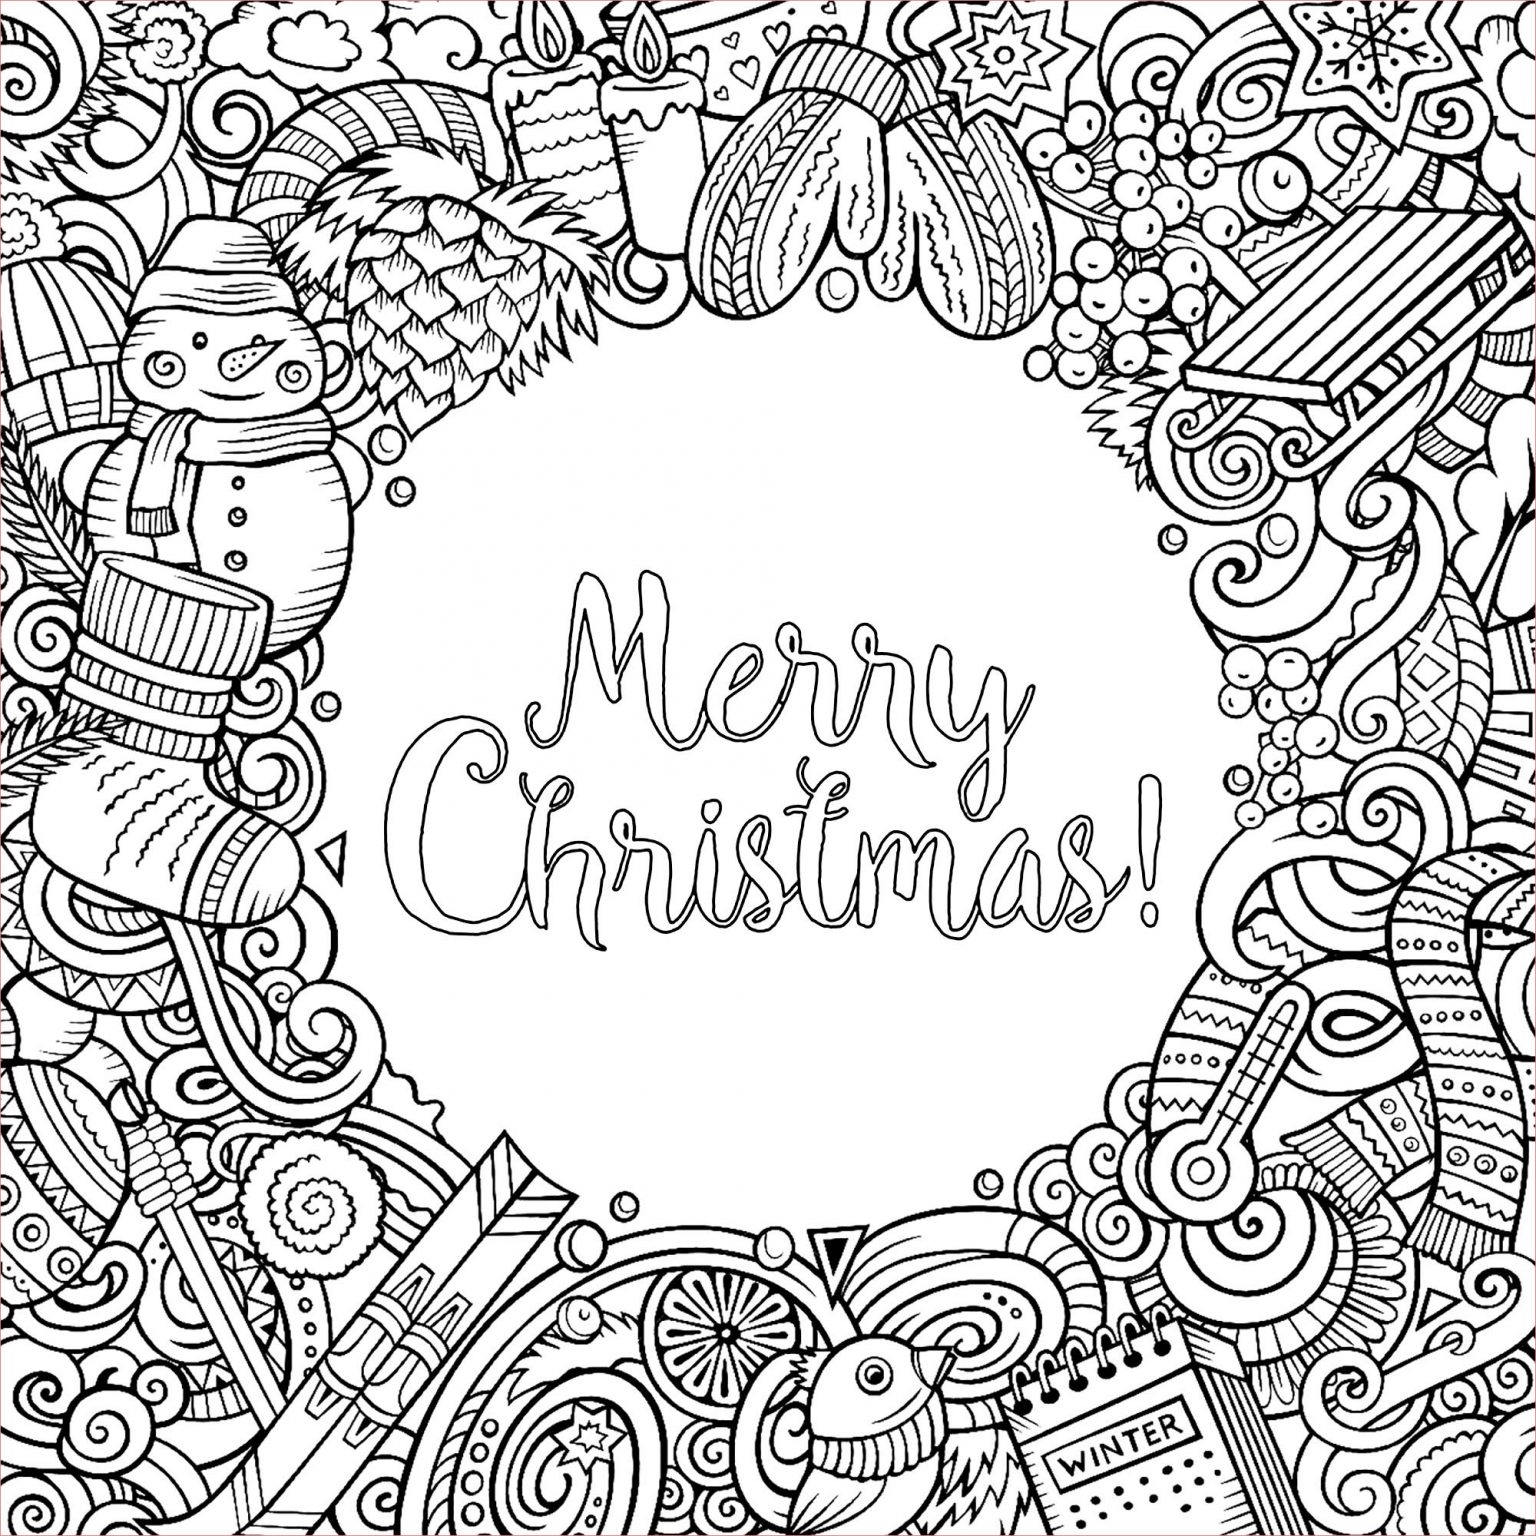 Coloriage Merry Christmas Meilleur De Merry Christmas Doodles with Text Christmas Adult